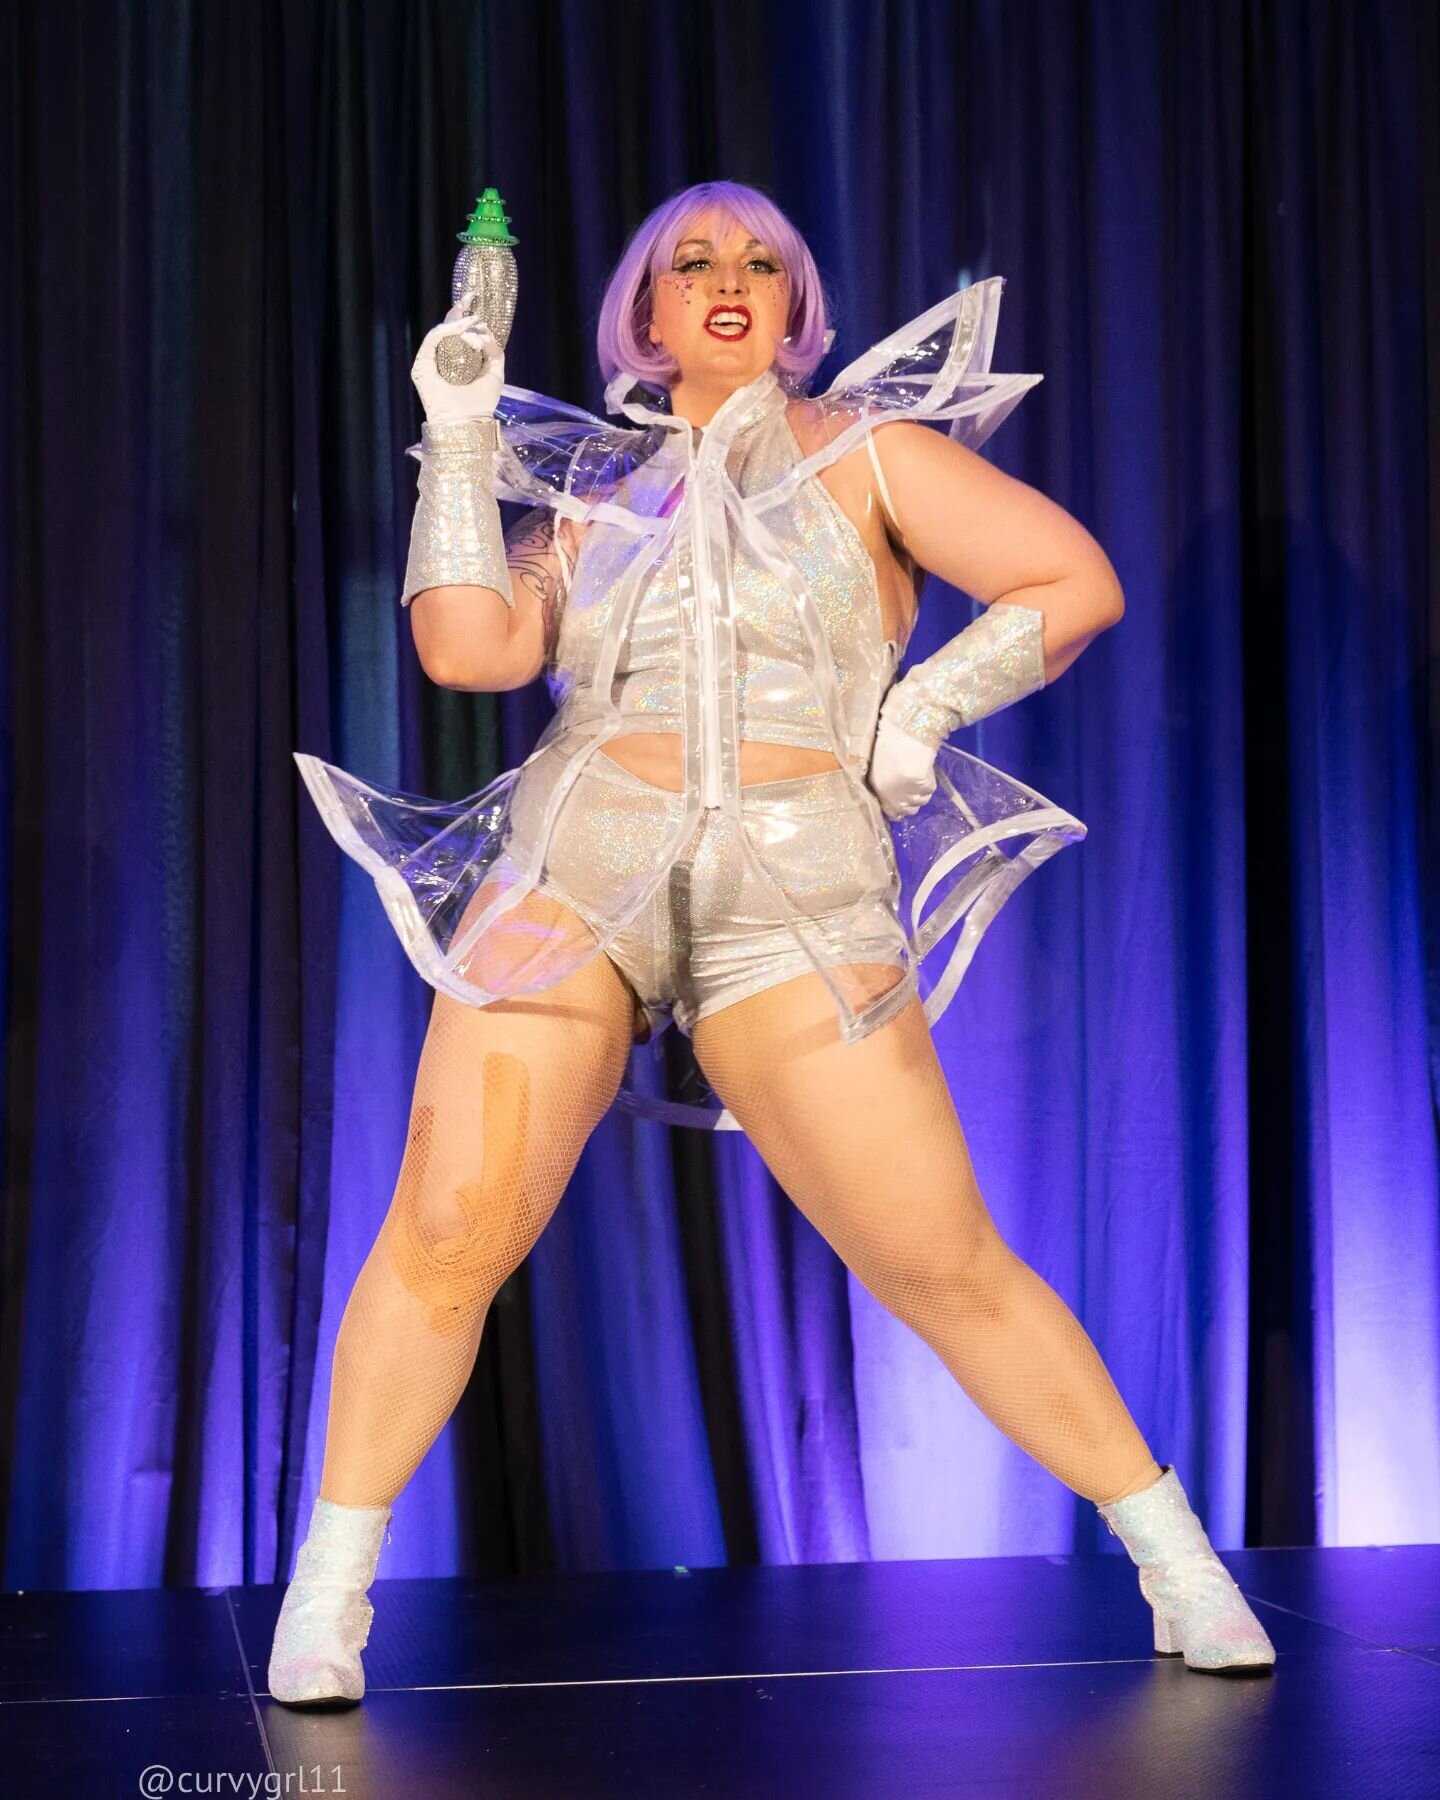 @curvygrl11 does it again! Ya'll this woman knows how to catch all the right angles. HIRE HER FOR YOUR PHOTOGRAPHY NEEDS! She captured me beautifully at the 2nd Annual @pnwburlesquefestival ! Can't wait to share more with you all. 

#asteriaatombomb 